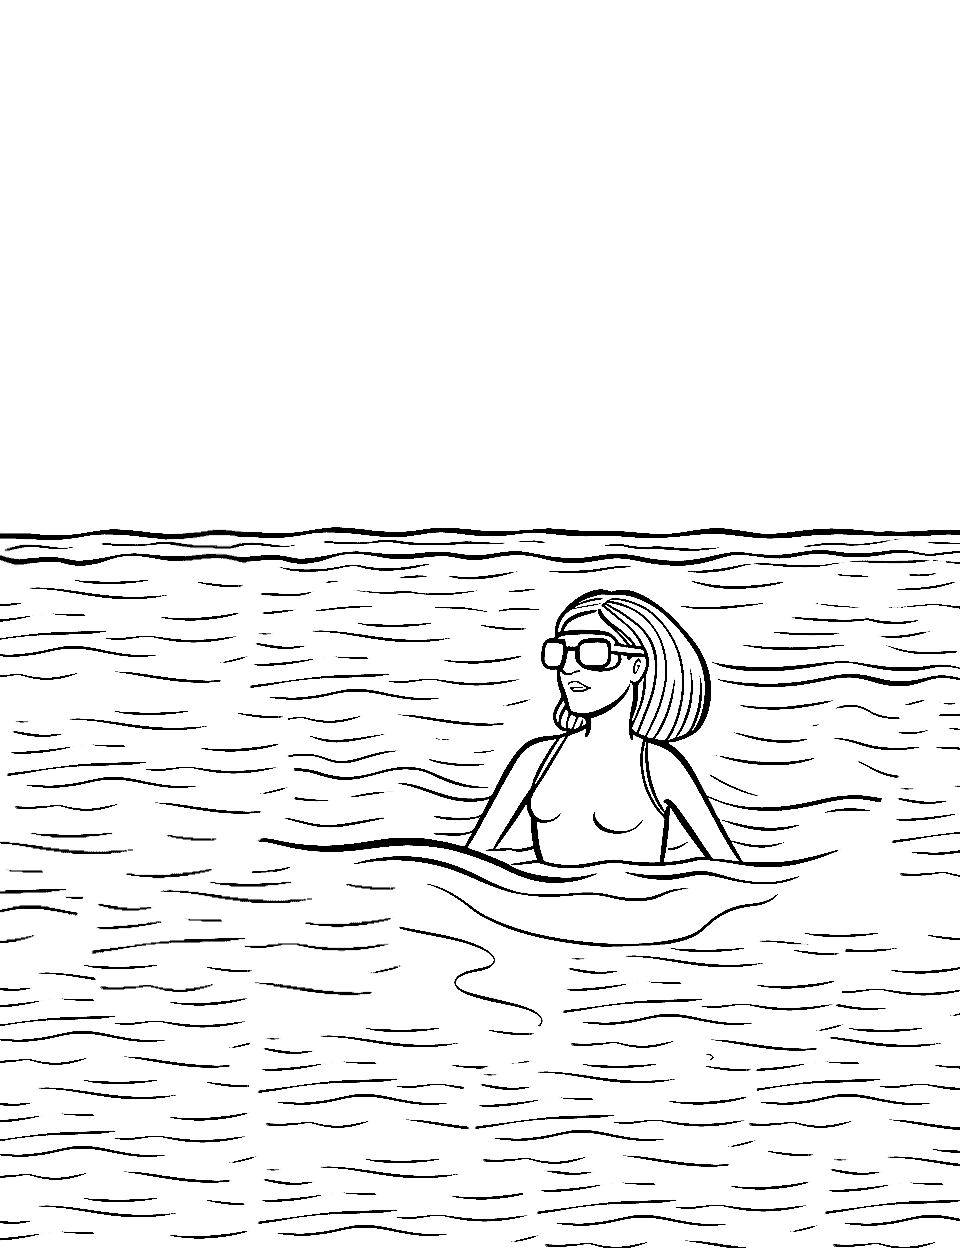 Caribbean Snorkeling Coloring Page - A lone woman snorkeling in the Caribbean Sea.